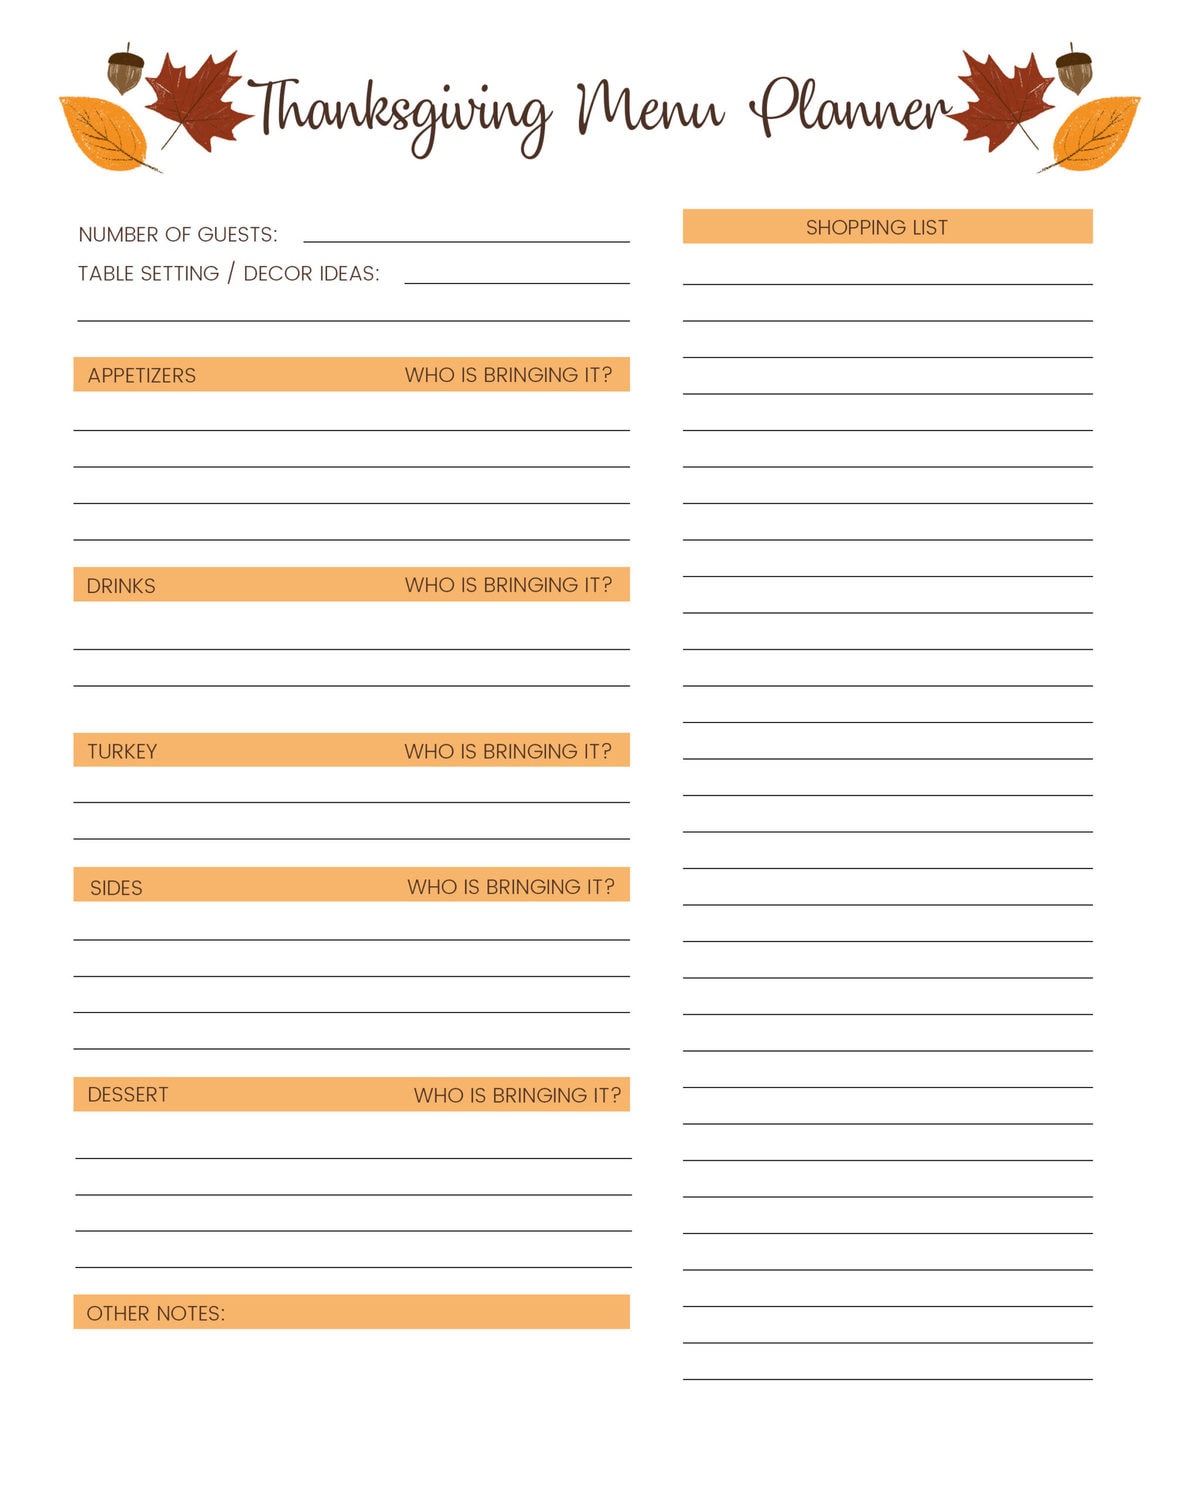 FREE Thanksgiving Menu Template, Schedule + Tags  Lil